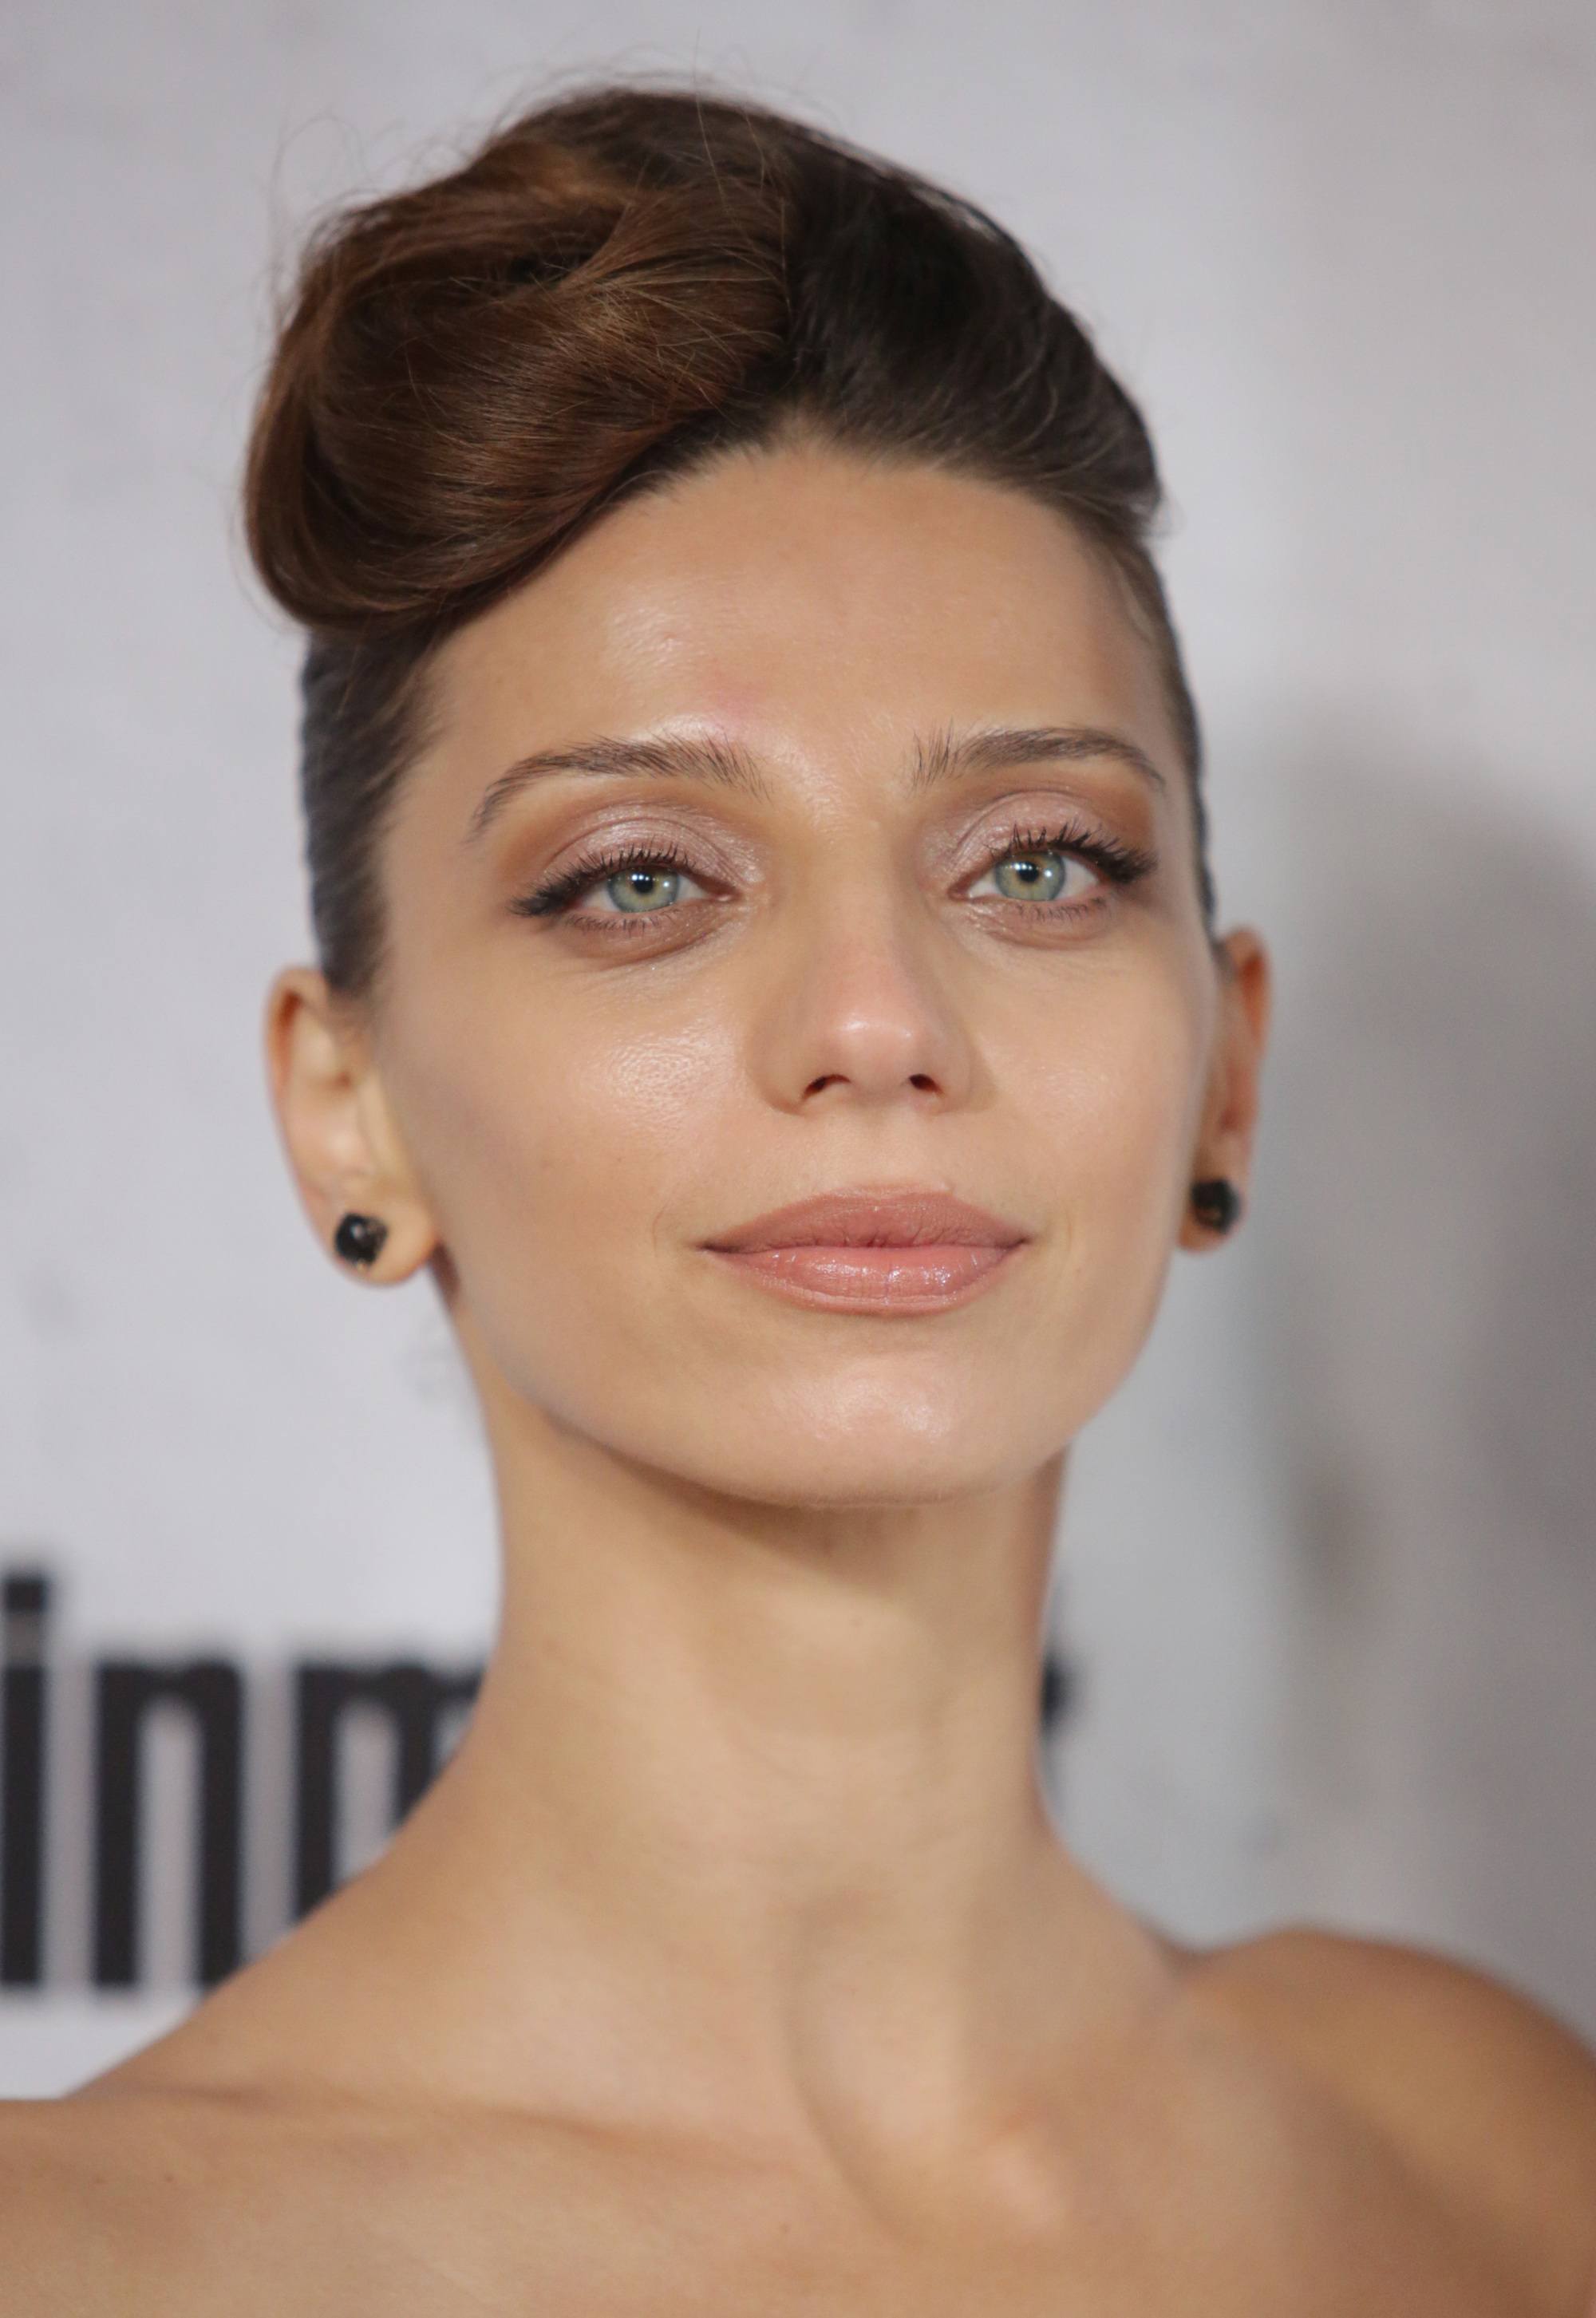 westworld actress angela sarafyan with her hair in a rockabilly inspired updo